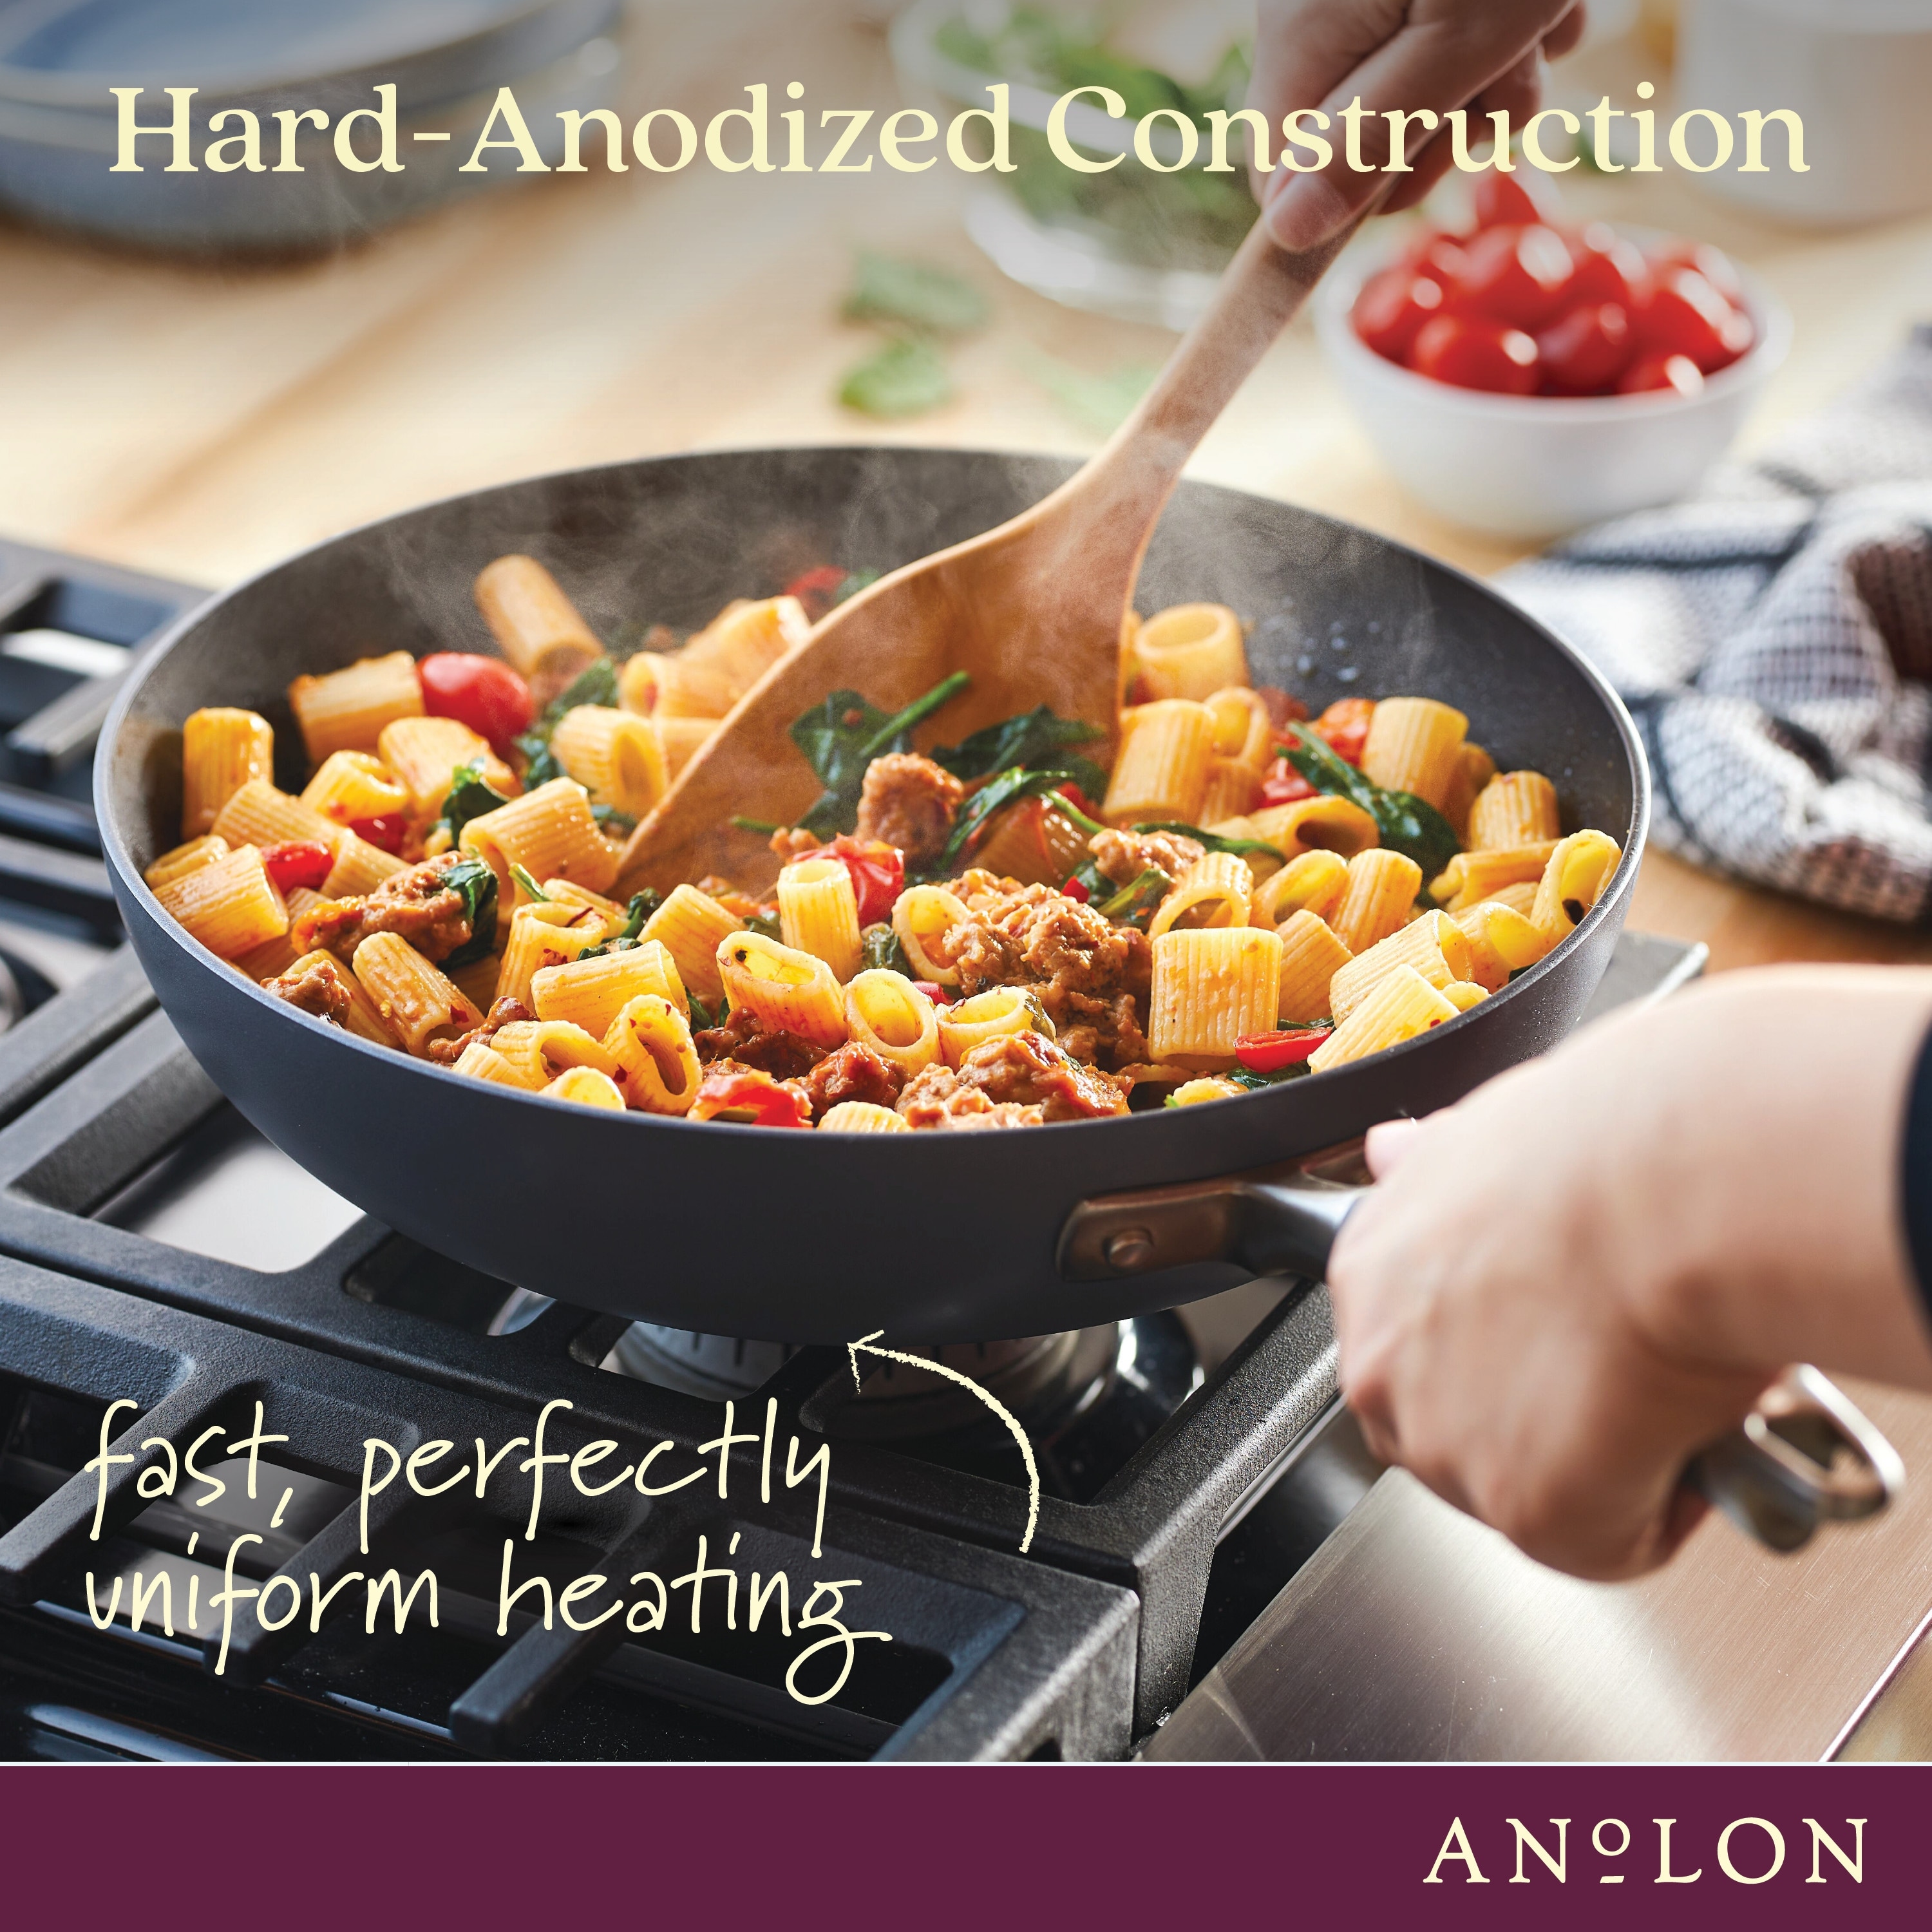 https://ak1.ostkcdn.com/images/products/is/images/direct/6ec466f7f0f871e865a9456b92aeacf40f95d658/Anolon-Advanced-Hard-Anodized-Nonstick-Ultimate-Pan-with-Lid%2C-12-Inch%2C-Gray.jpg